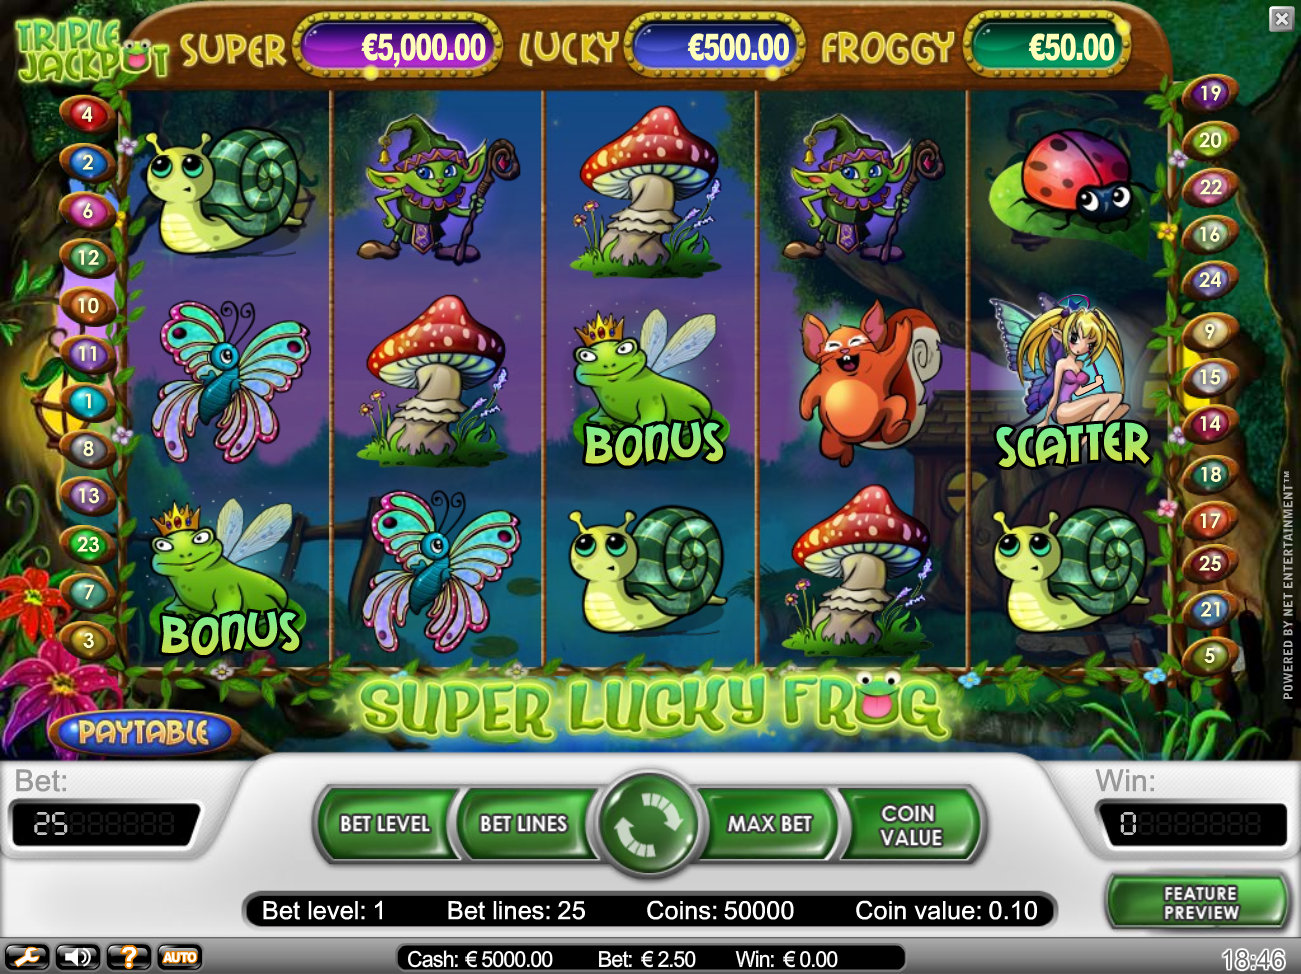 Super Lucky Frog (Super Lucky Frog) from category Slots